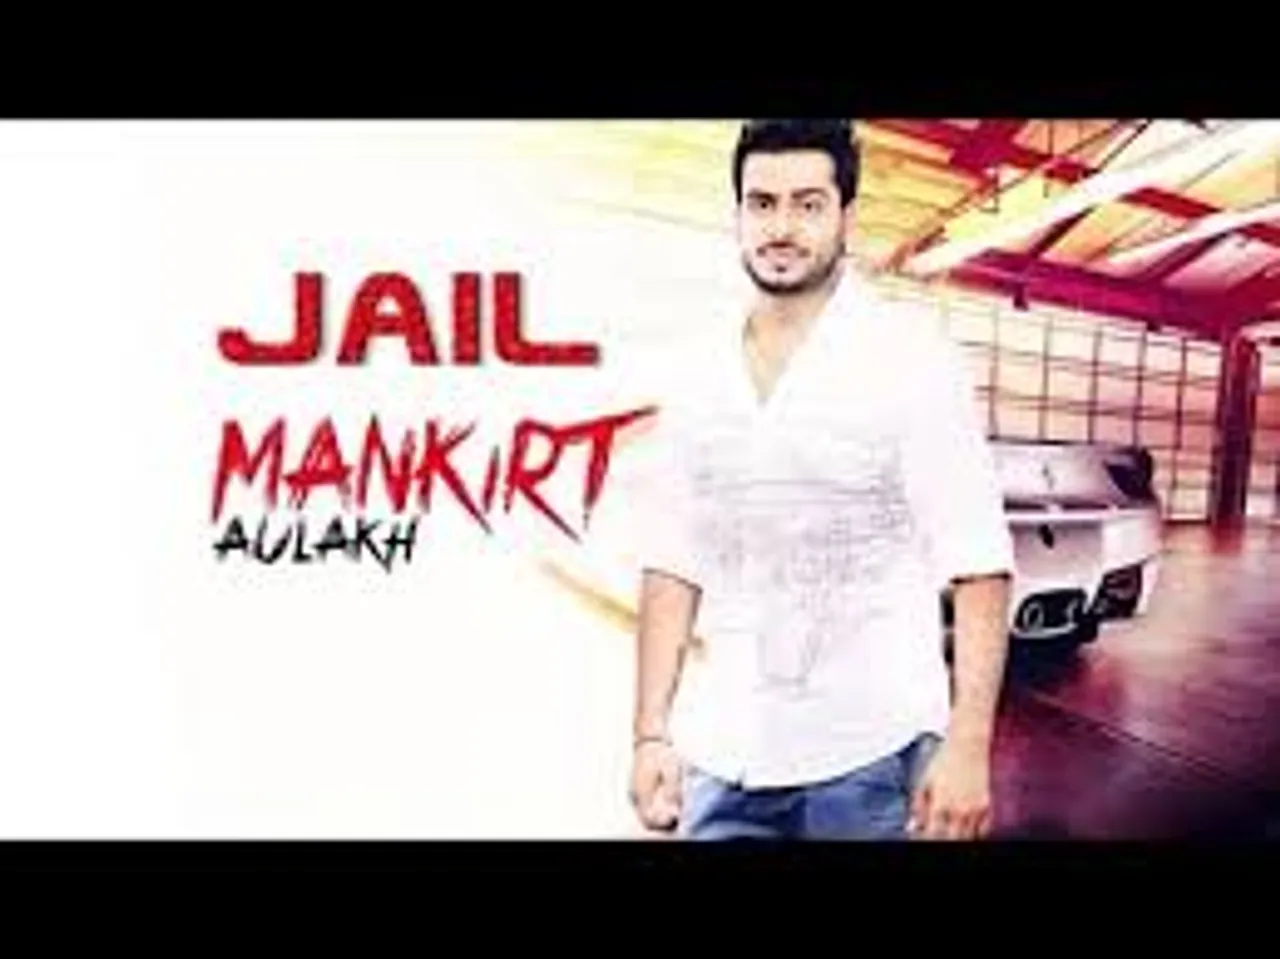 MANKIRAT AULAKH'S NEW SONG 'JAIL' IS GETTING LOVE FROM FANS AND FOLLOWERS.